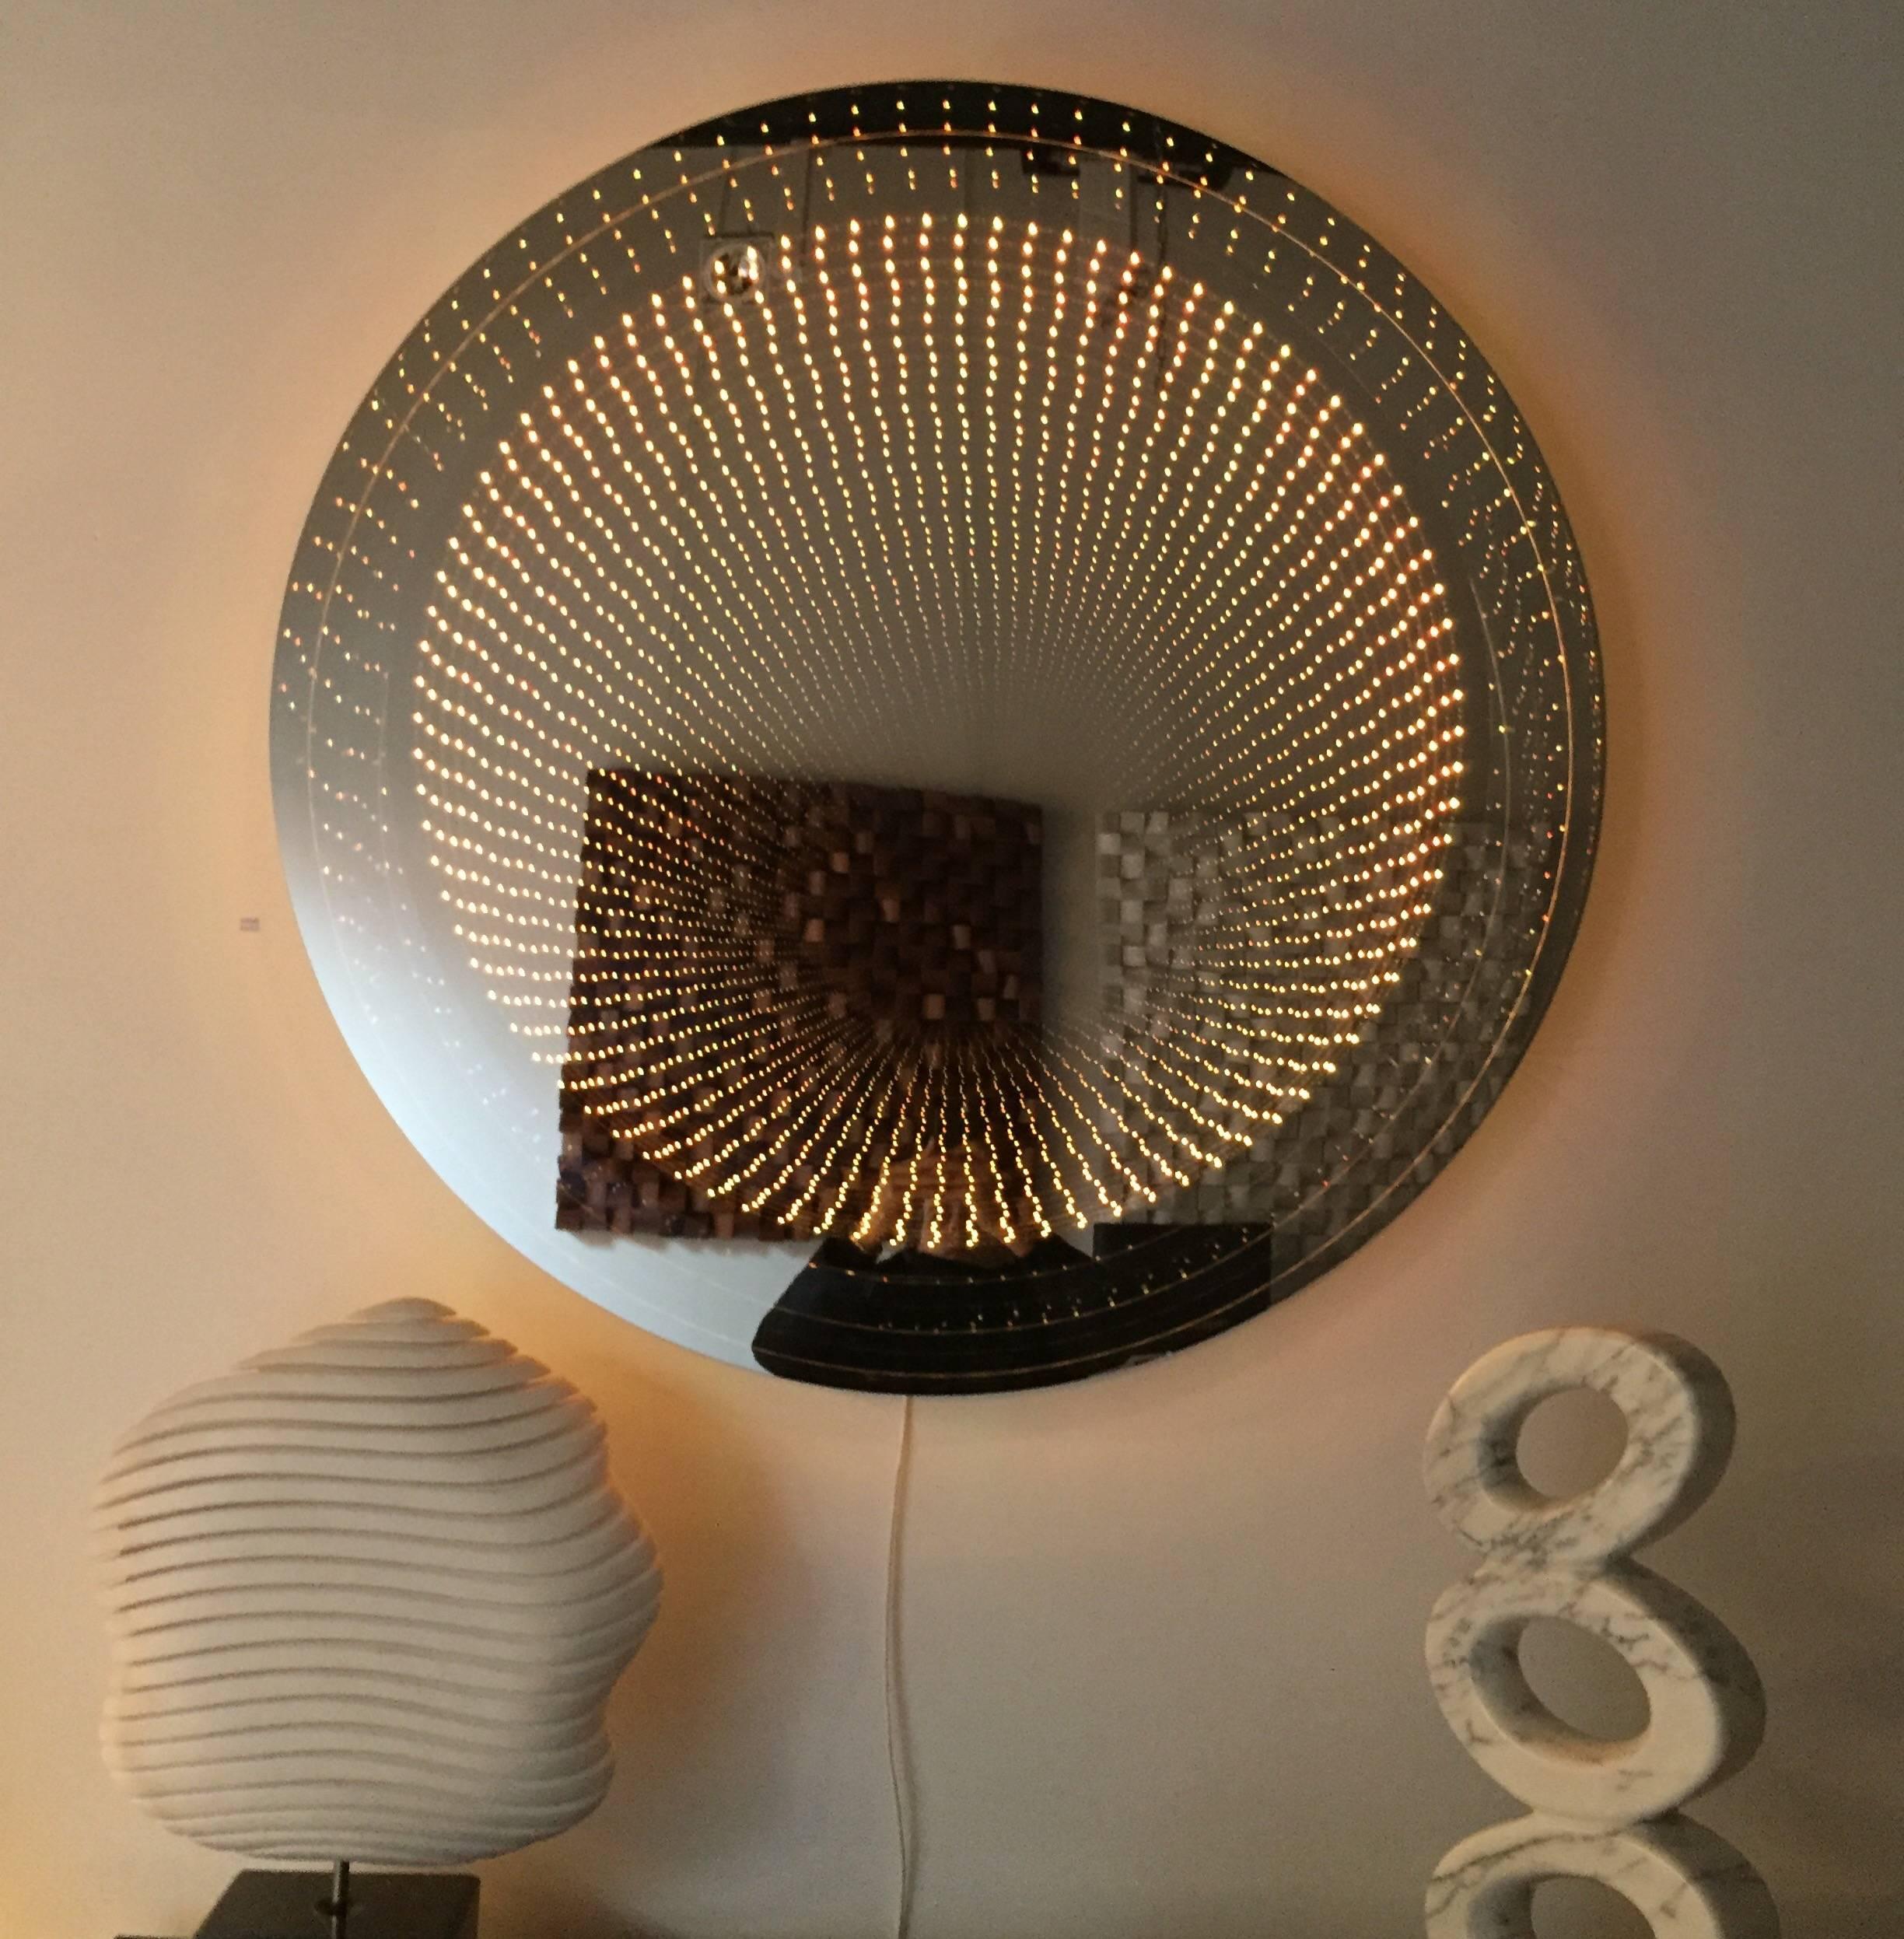 Raphael Fenice infinity mirror in Lucite and led technology
When the mirror is off looks like a real mirror.
Mirror can be controlled by a remote to switch on/off and change color
Wired for European use.
Hand signed on the back by the